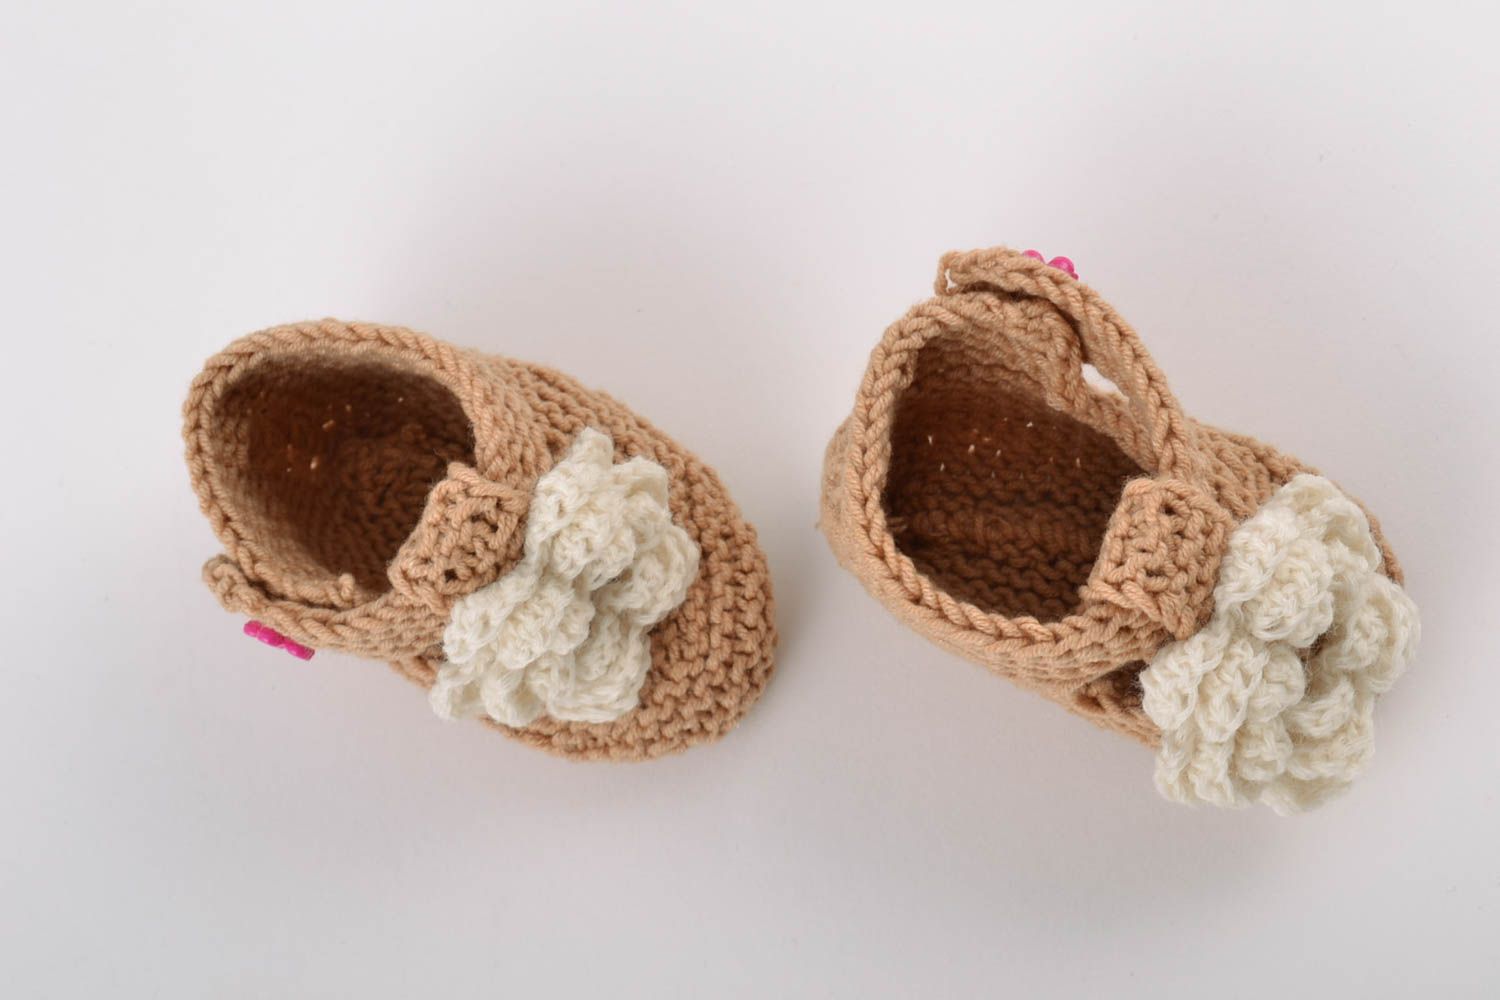 Handmade knitted brown booties made of cotton with flowers for babies photo 2